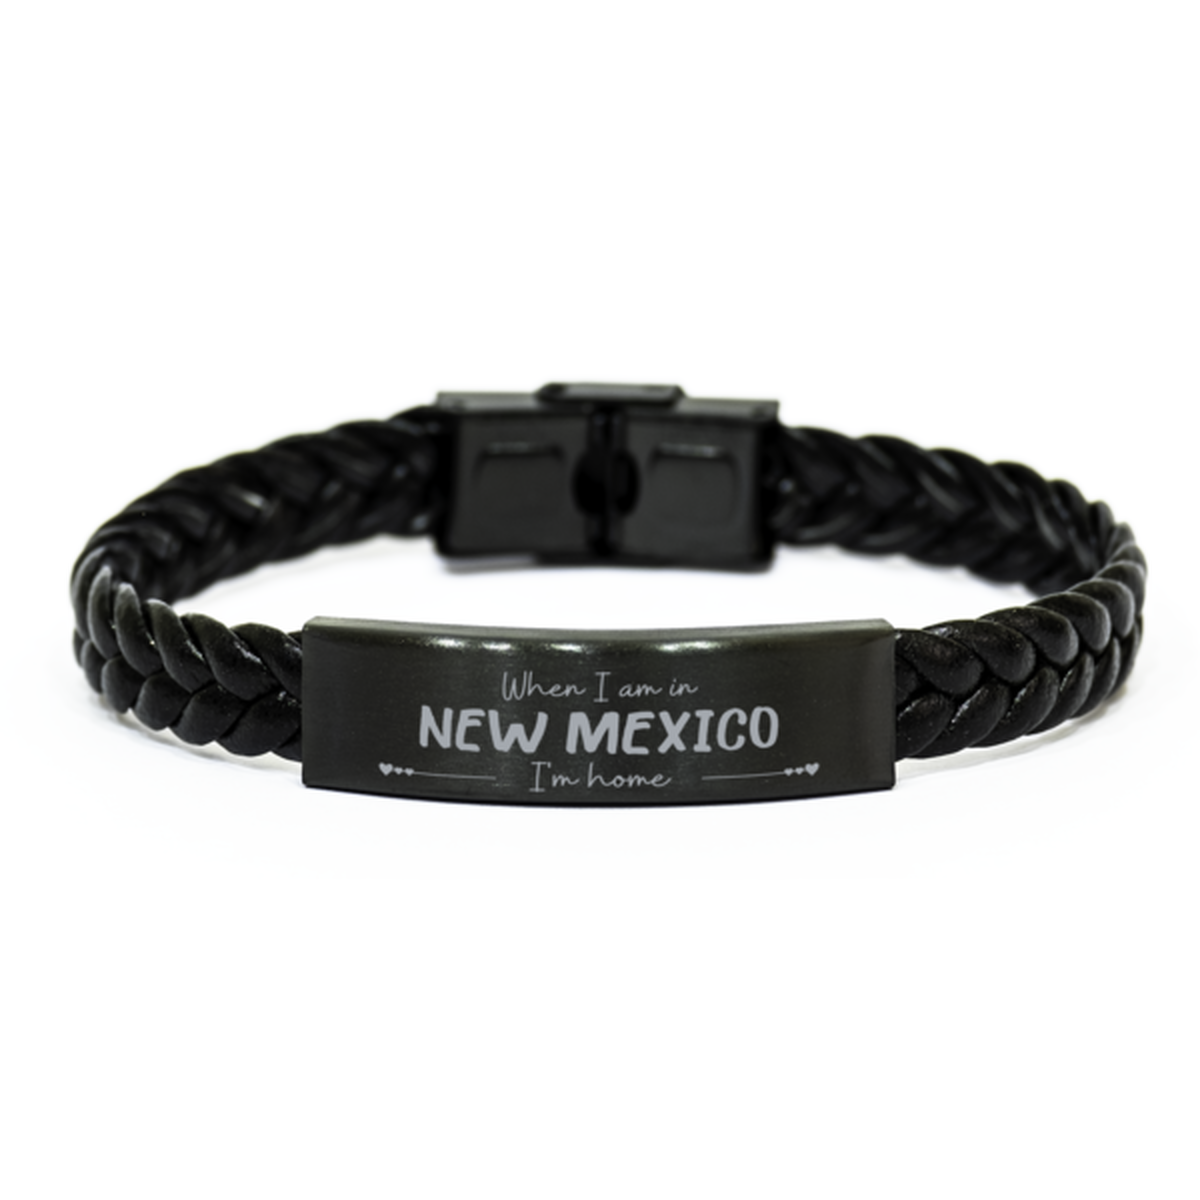 When I am in New Mexico I'm home Braided Leather Bracelet, Cheap Gifts For New Mexico, State New Mexico Birthday Gifts for Friends Coworker